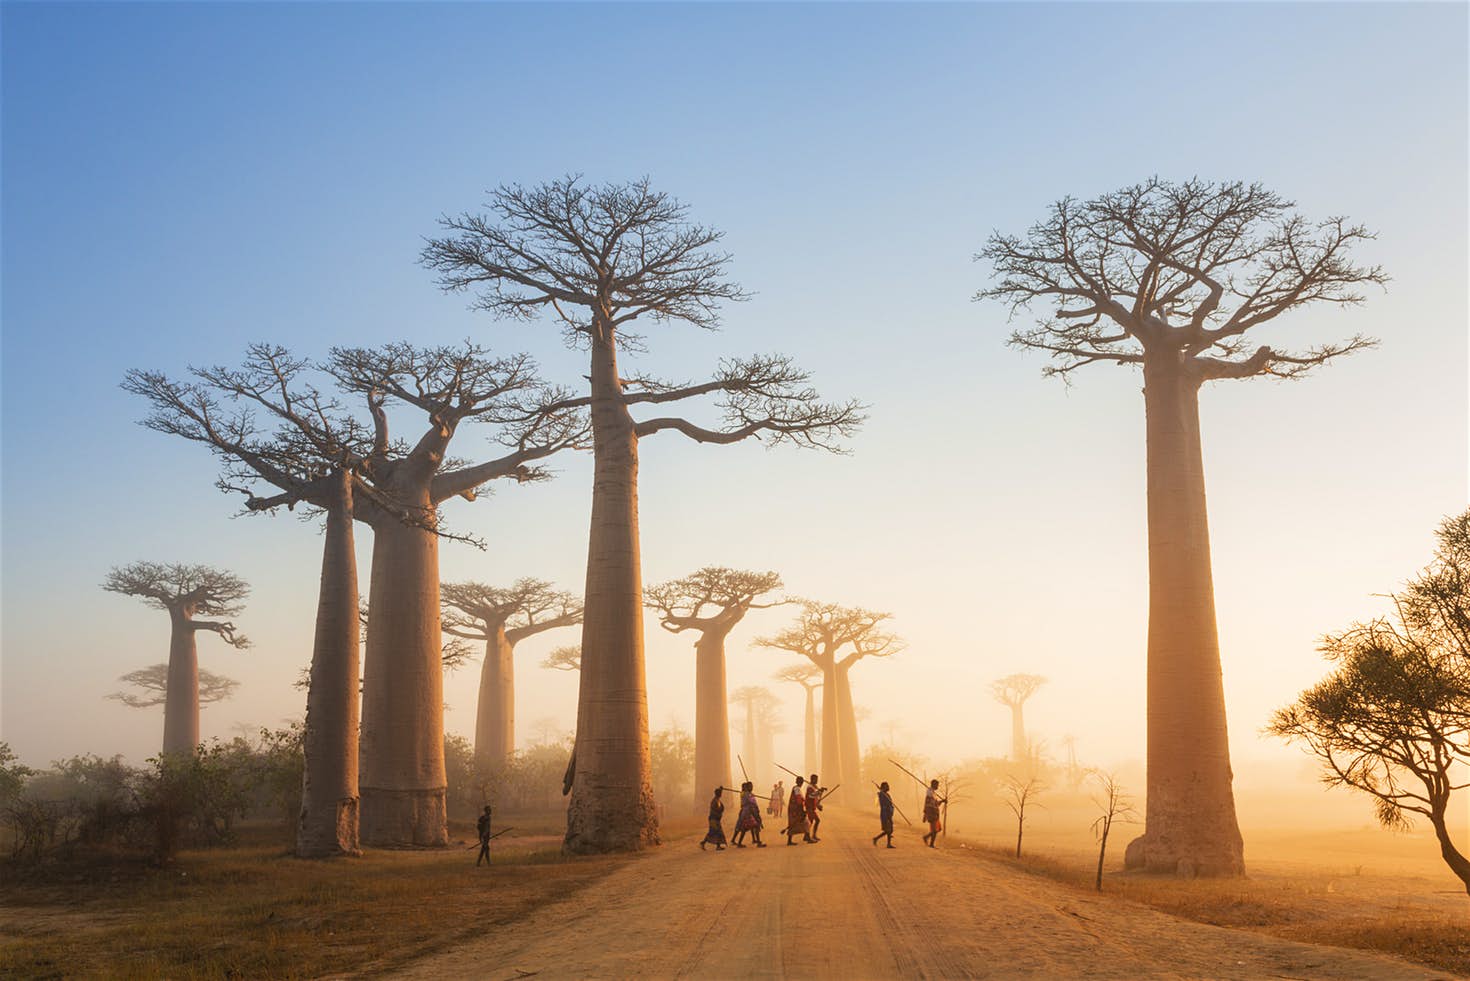 Not Even Masters of General Knowledge Can Get a Perfect Score on This Quiz. Can You? Avenue of the Baobabs, Madagascar